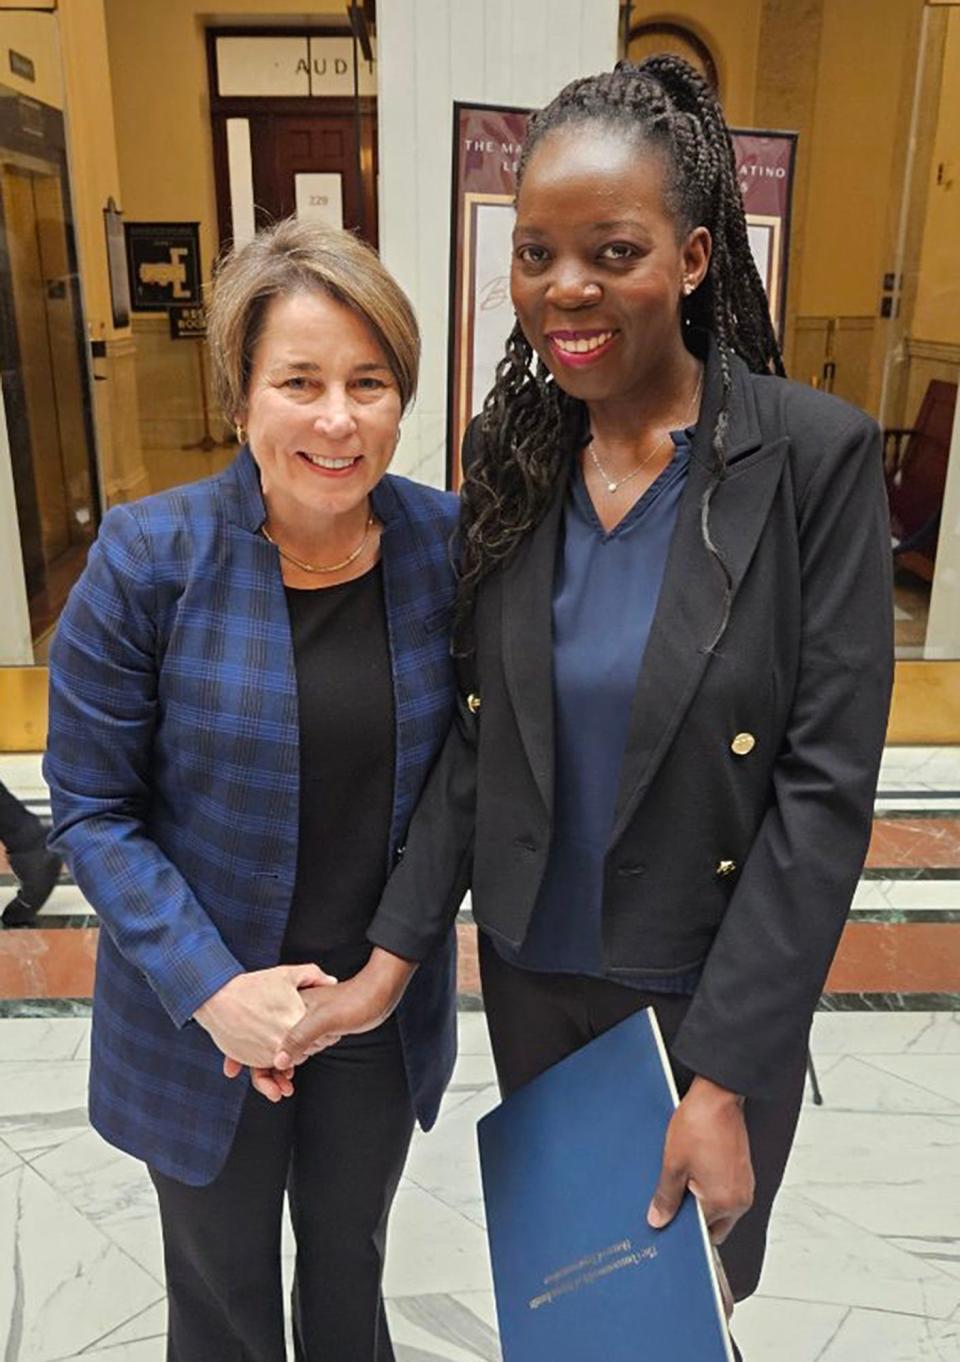 Norah Zoummar, right, co-owner of 33 All American Diner in Ashland, poses with Gov. Maura Healey at the State House after being presented with a Black Excellence Award, which is sponsored by the Massachusetts Black and Latino Legislative Caucus. A Ugandan singer, Zoummar raises money to support women and children in her home village of Namwendwa.